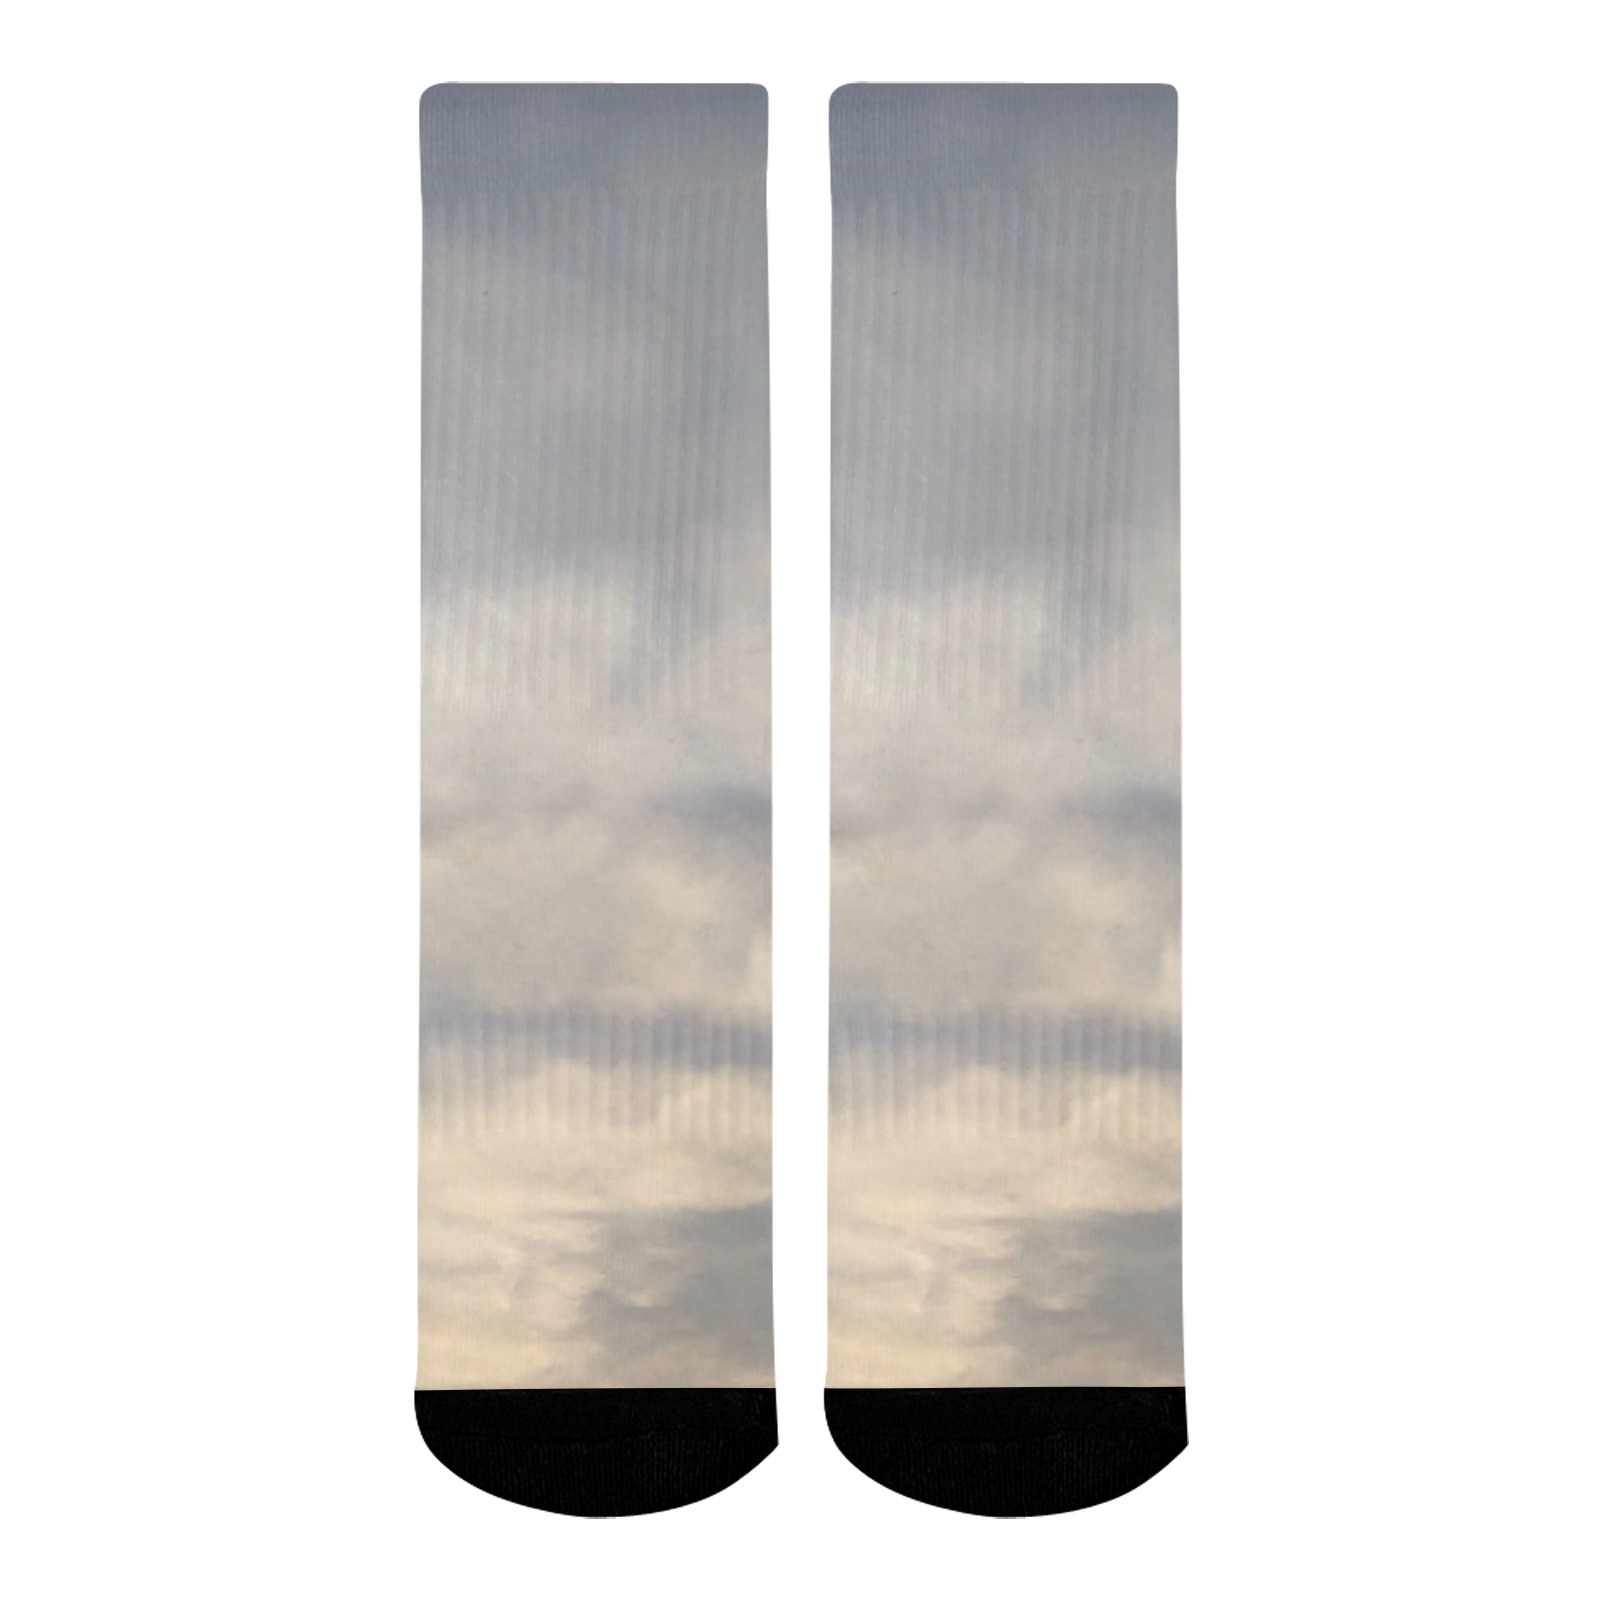 Rippled Cloud Collection Mid-Calf Socks (Black Sole)